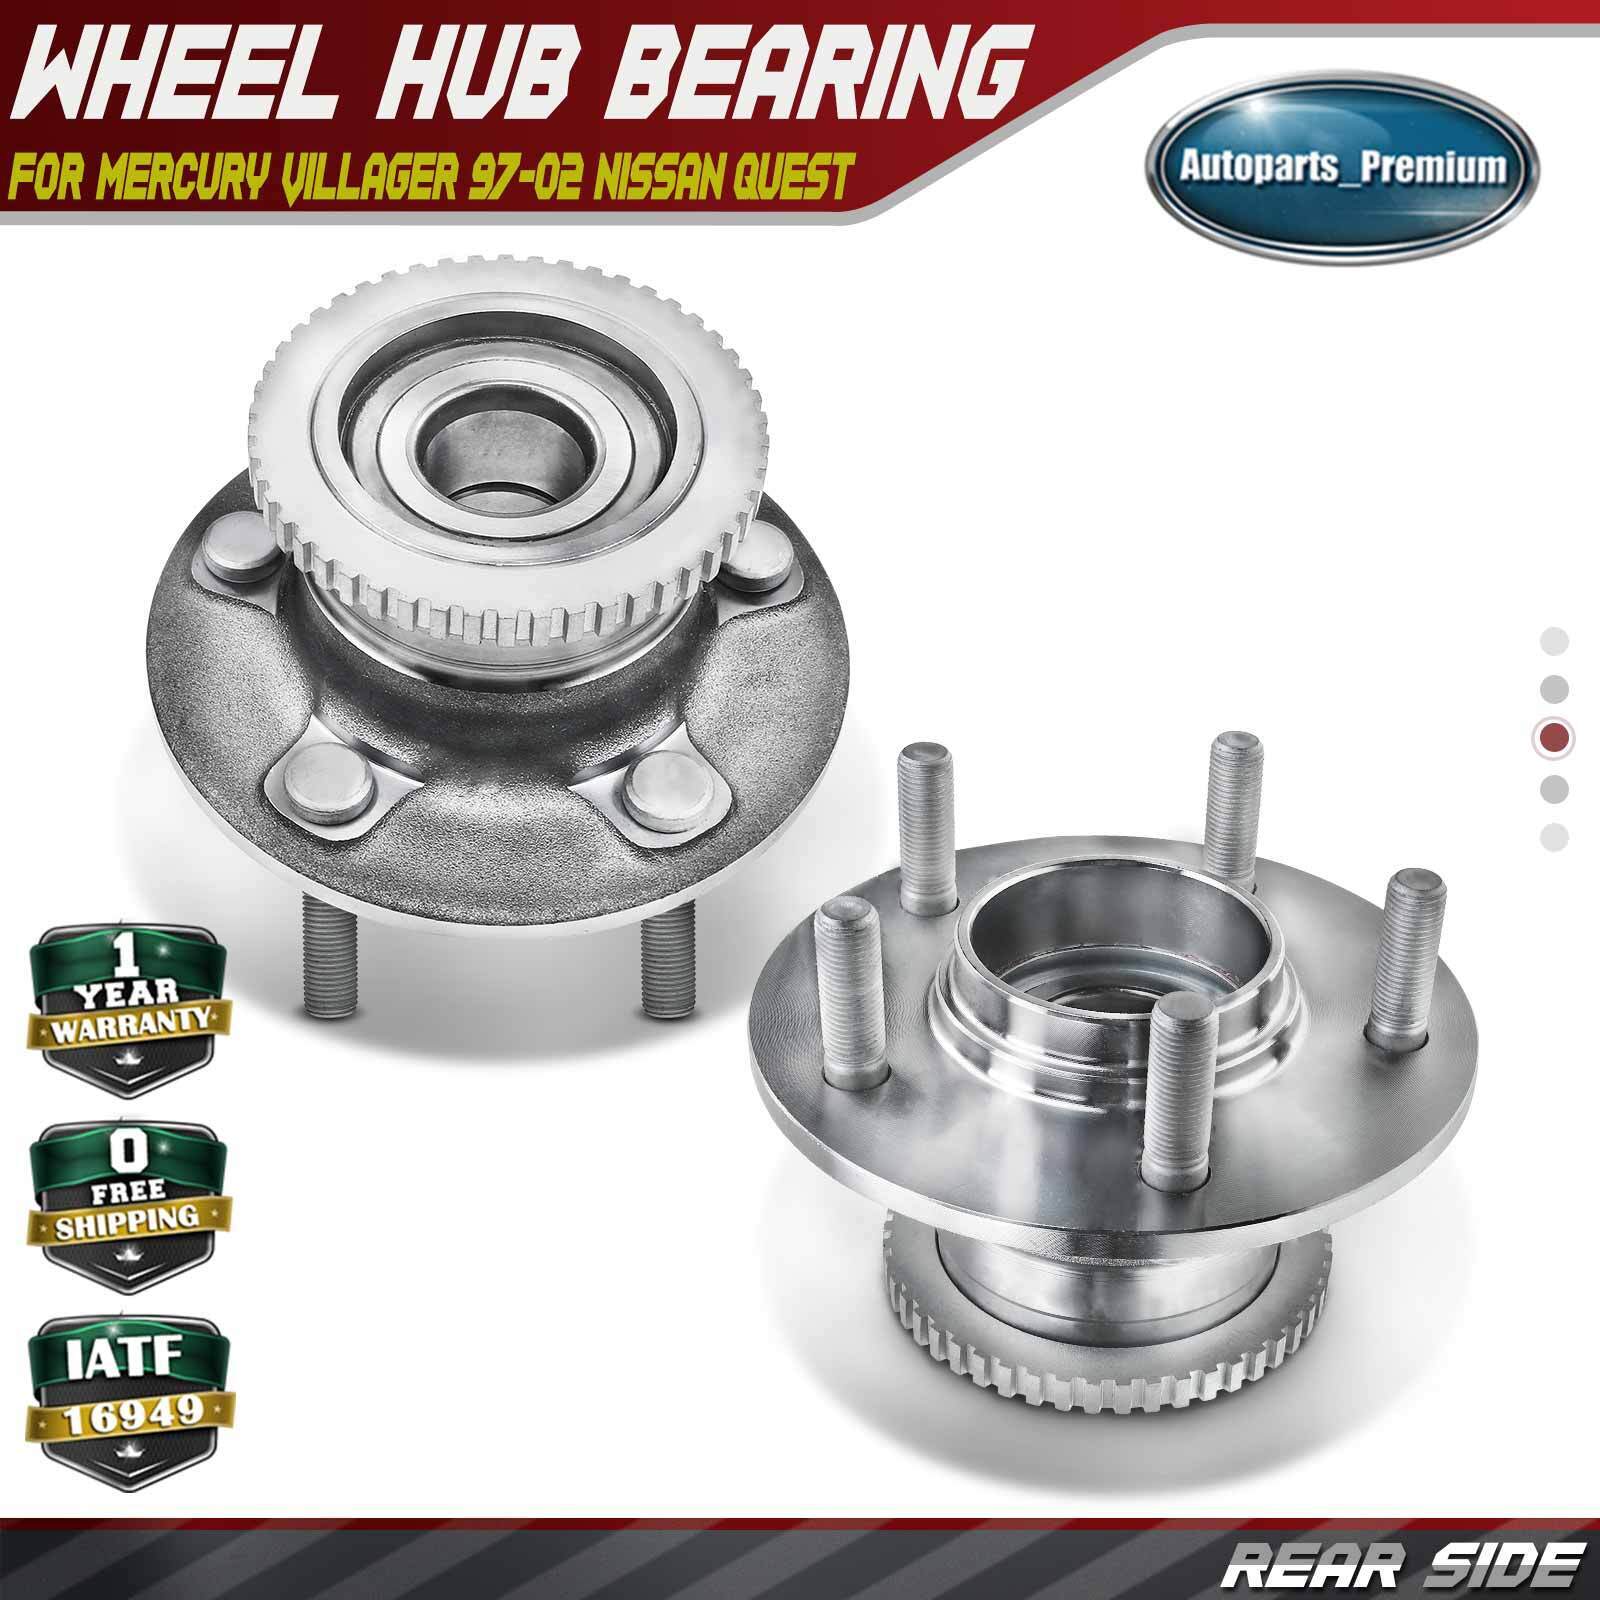 2x Rear Side Wheel Hub Bearing Assembly for Nissan Quest Mercury Villager 97-02